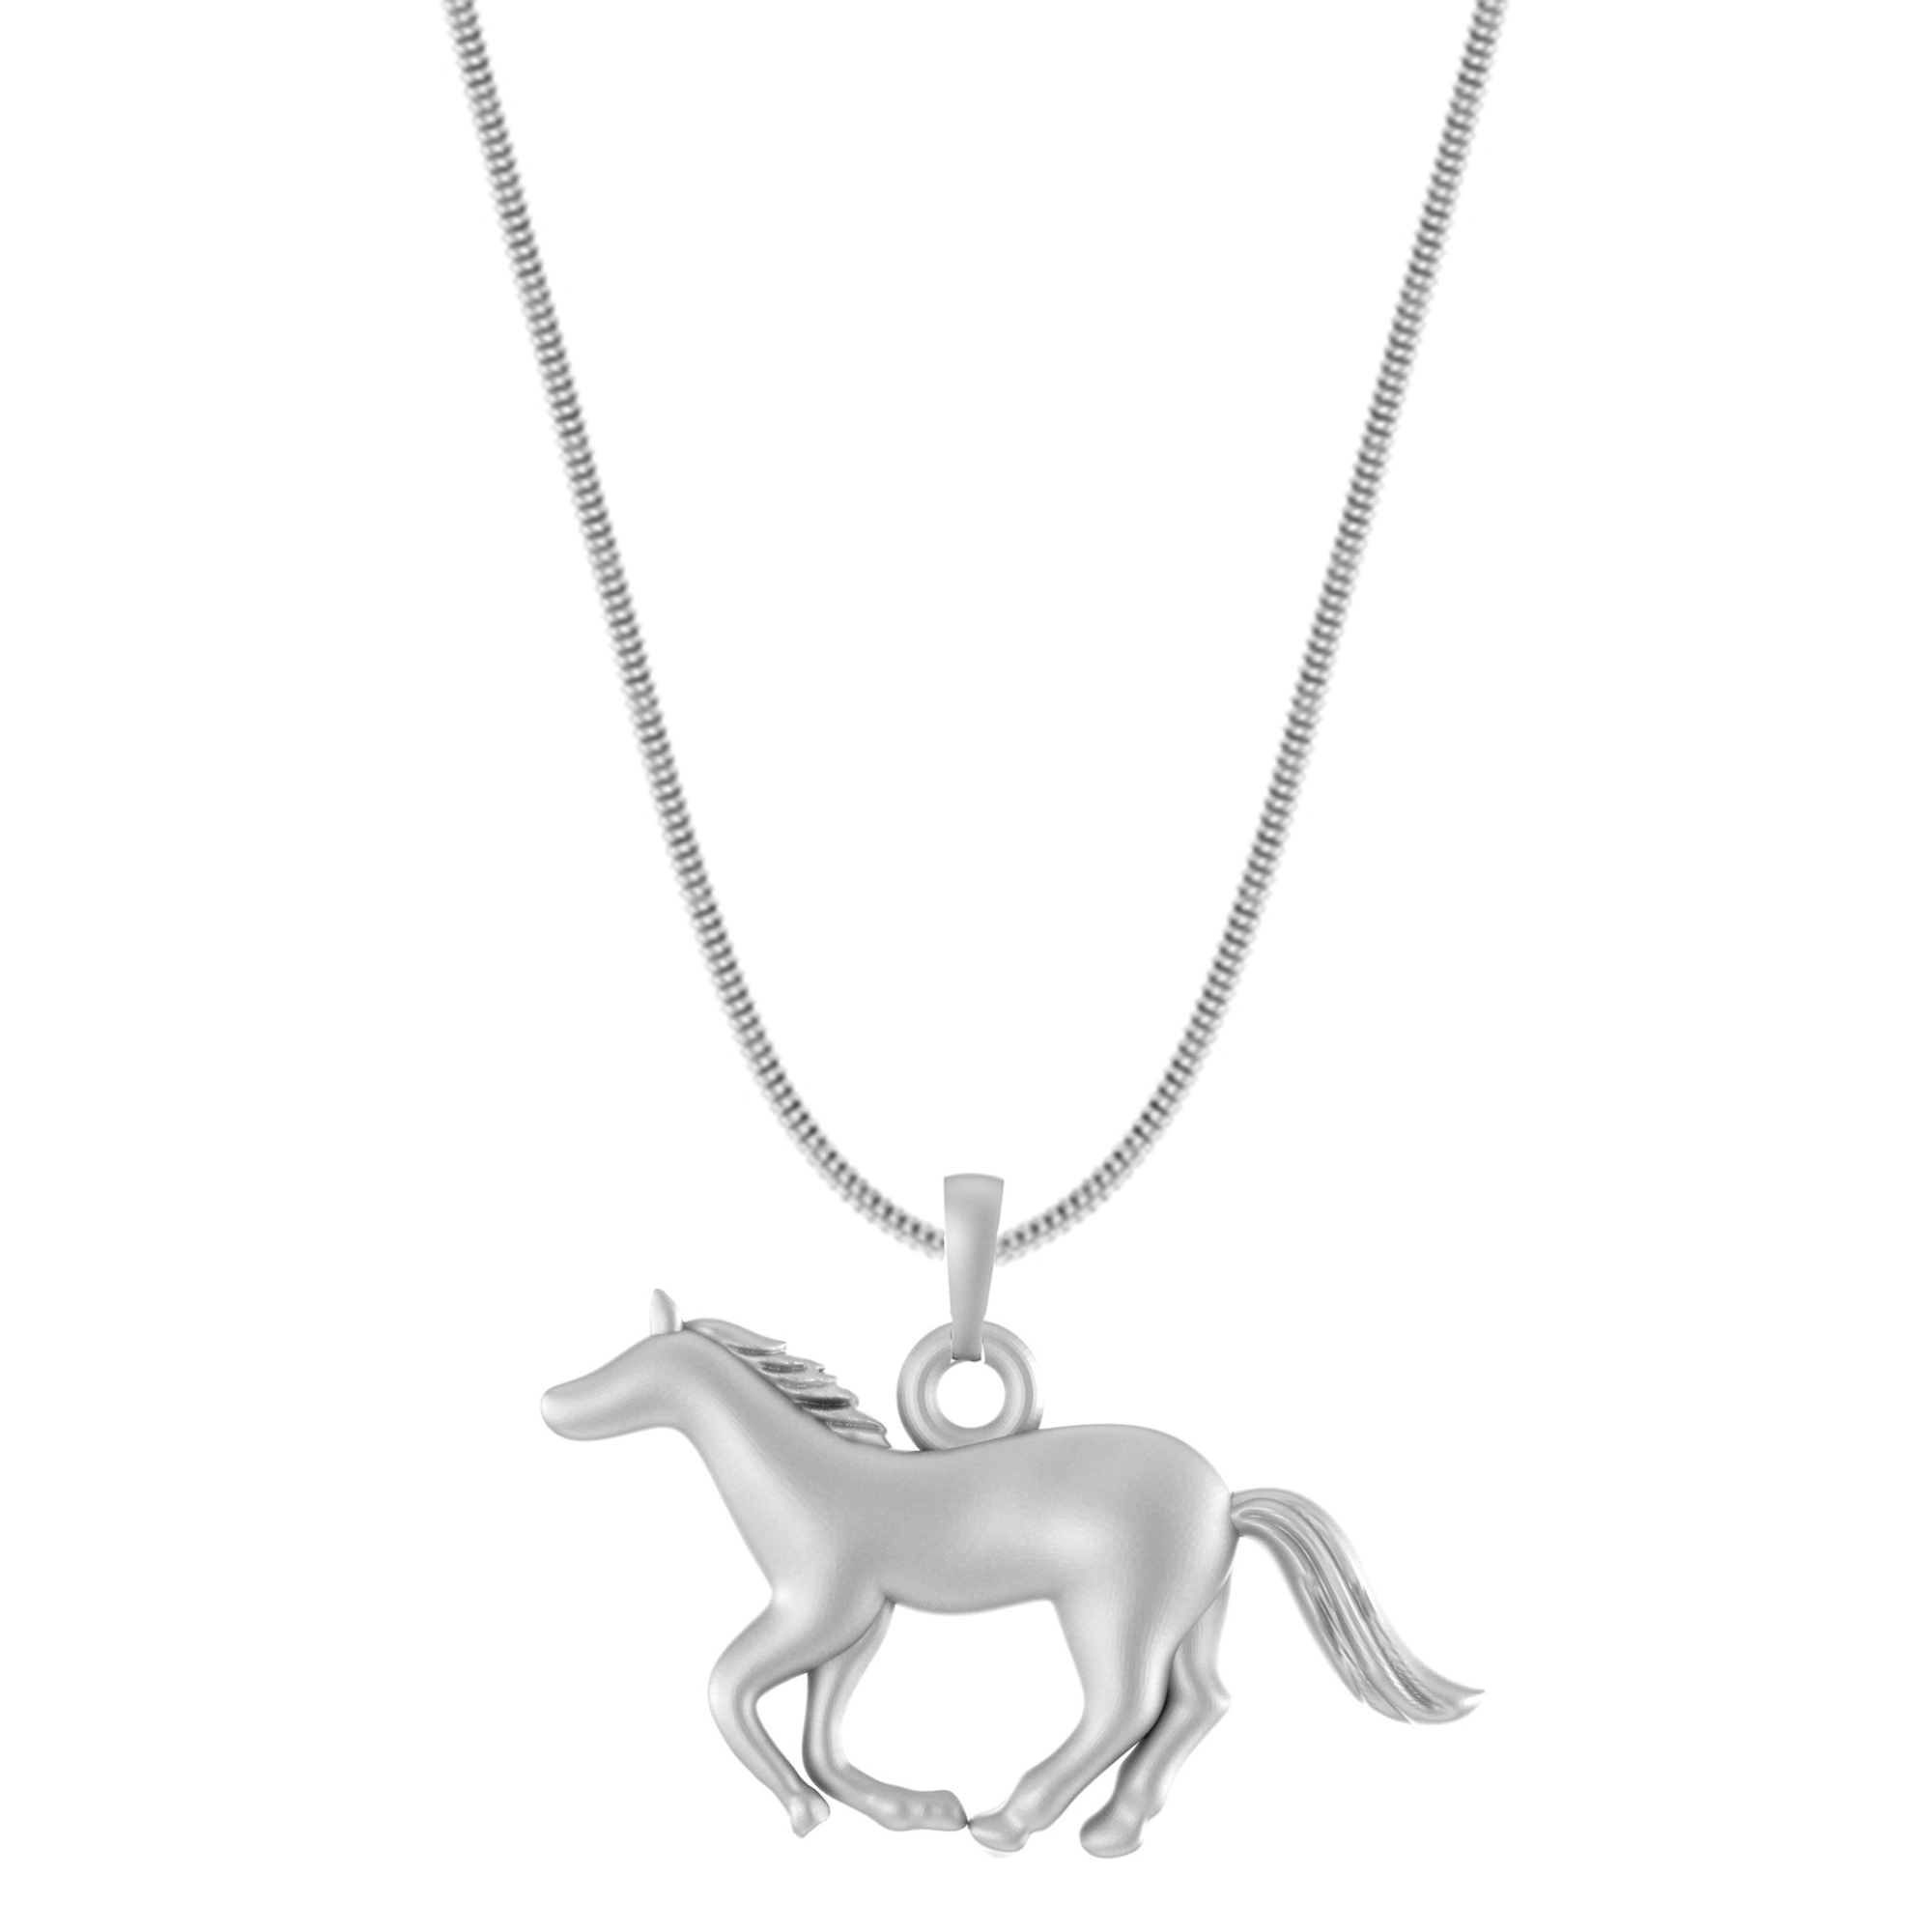 Akshat Sapphire Sterling Silver (92.5% purity) Strength Symbolic Horse Chain Pendant (Pendant with Snake Chain) for Men & Women Pure Silver Horse Chain Locket to represent strength and power